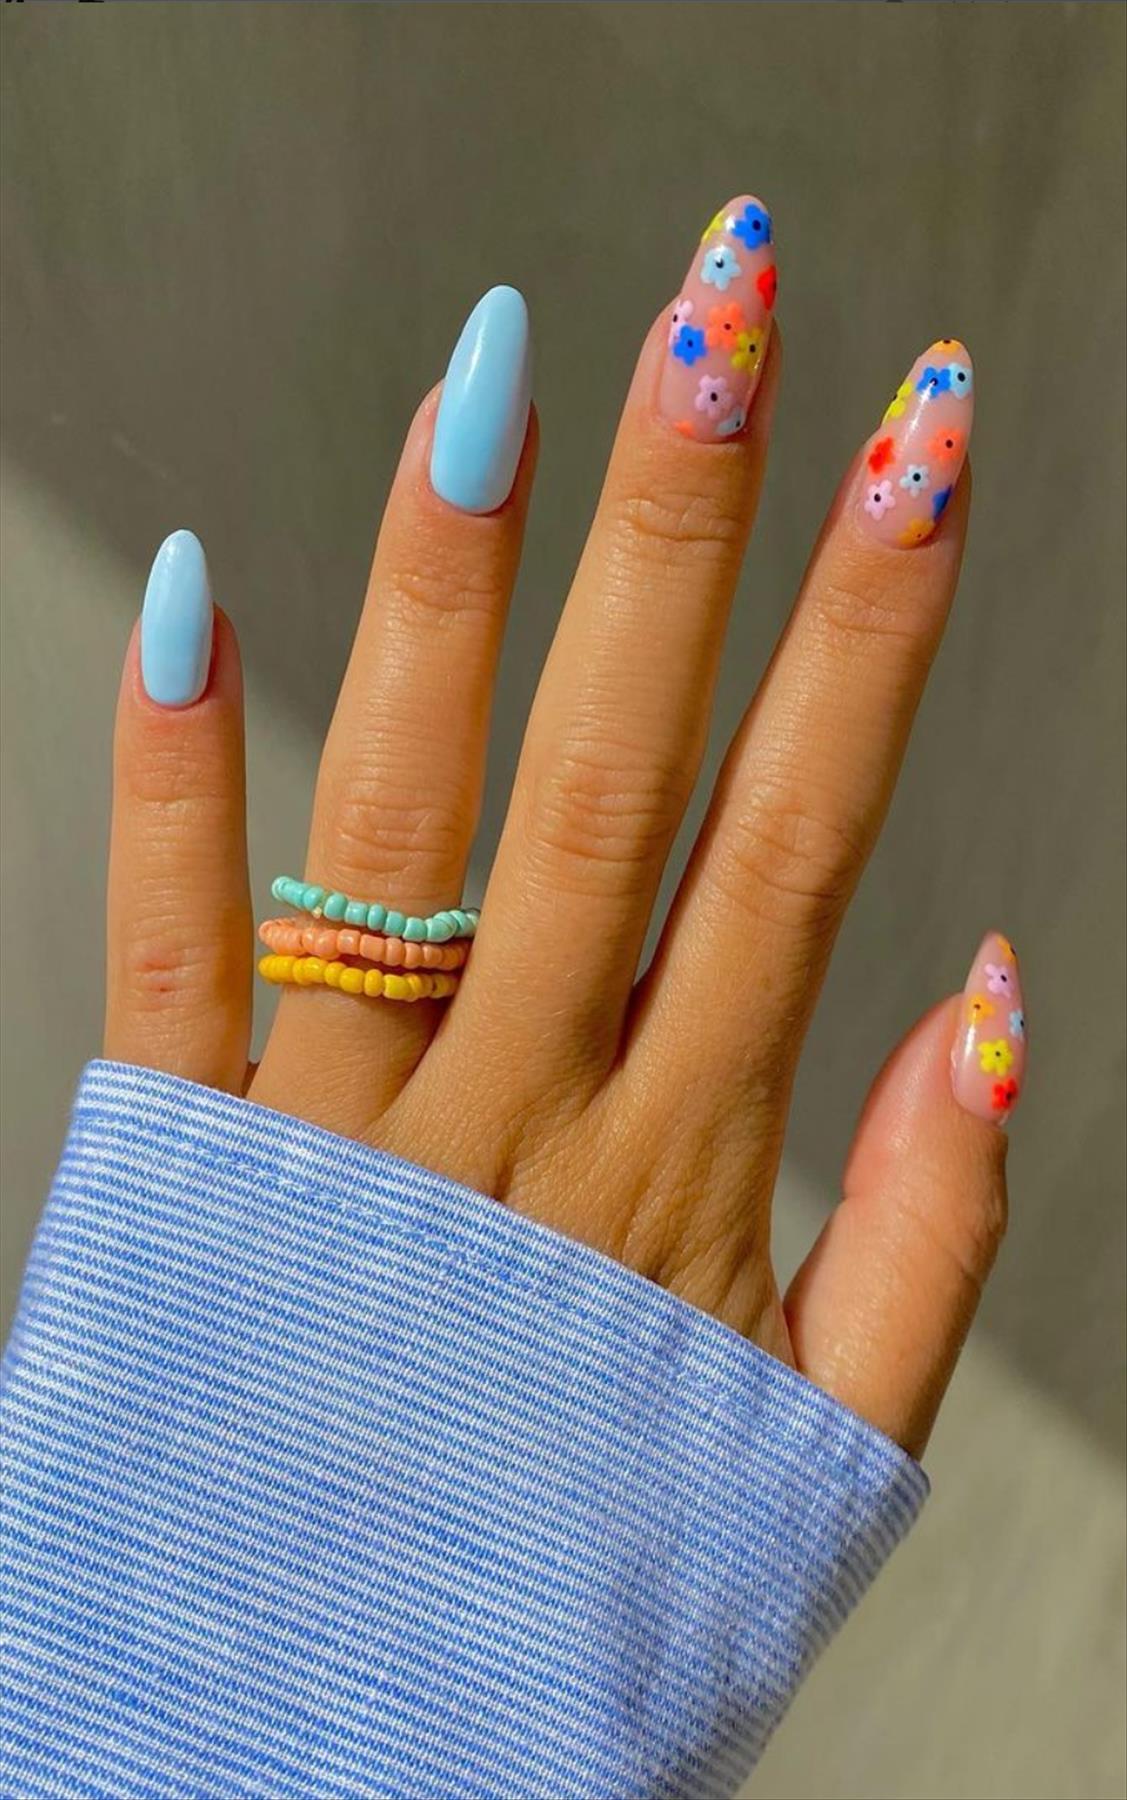 Trendy nail art with short almond shaped nails 2022